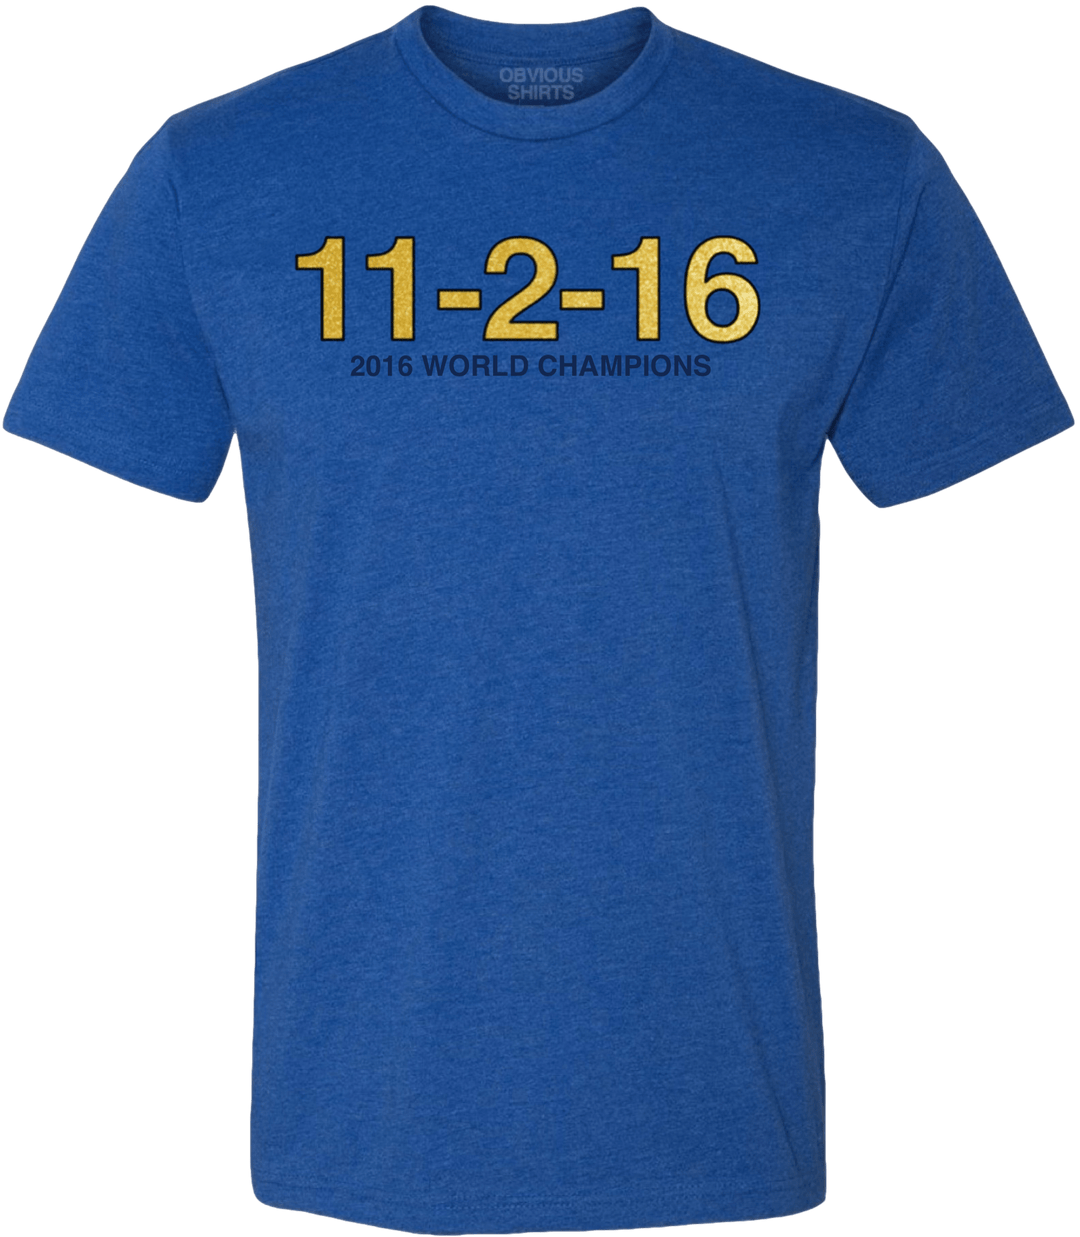 11-2-16 (ANNIVERSARY EDITION) - OBVIOUS SHIRTS